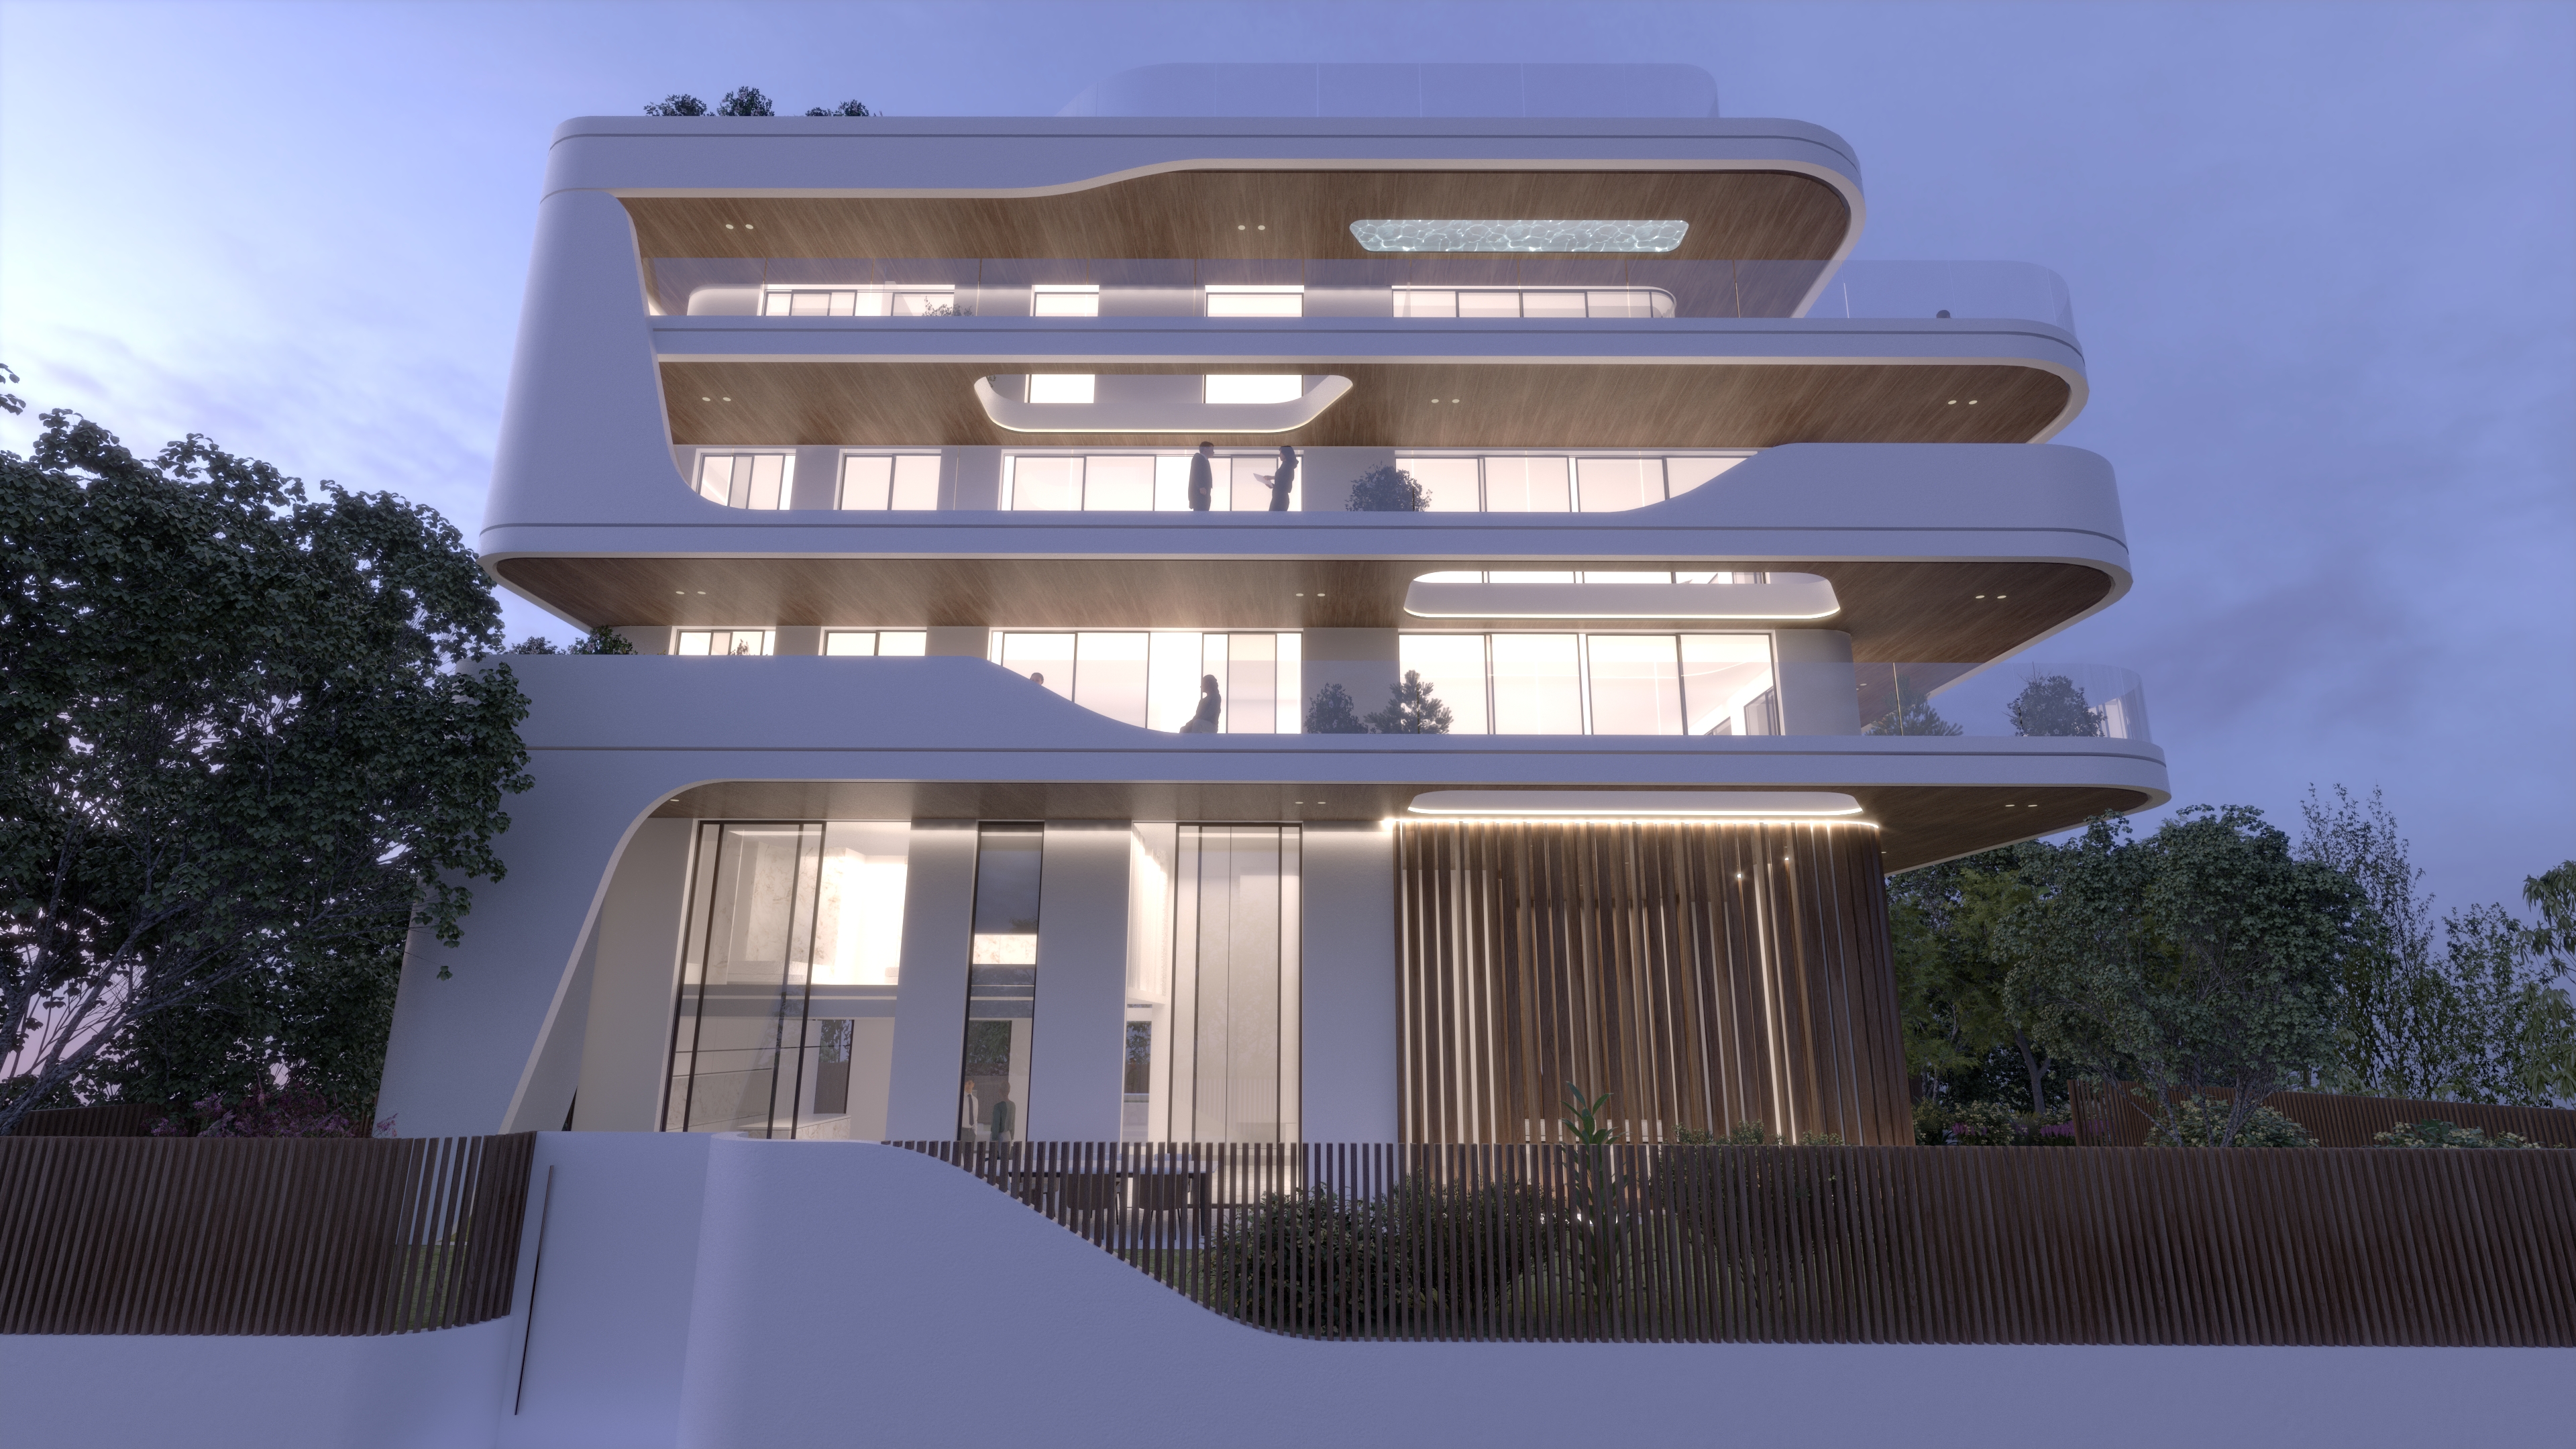 Estia Developments continues to grow by shaping and redefining the high-end real estate market in Greece by introducing responsible luxury dwellings in the country’s most strategic location